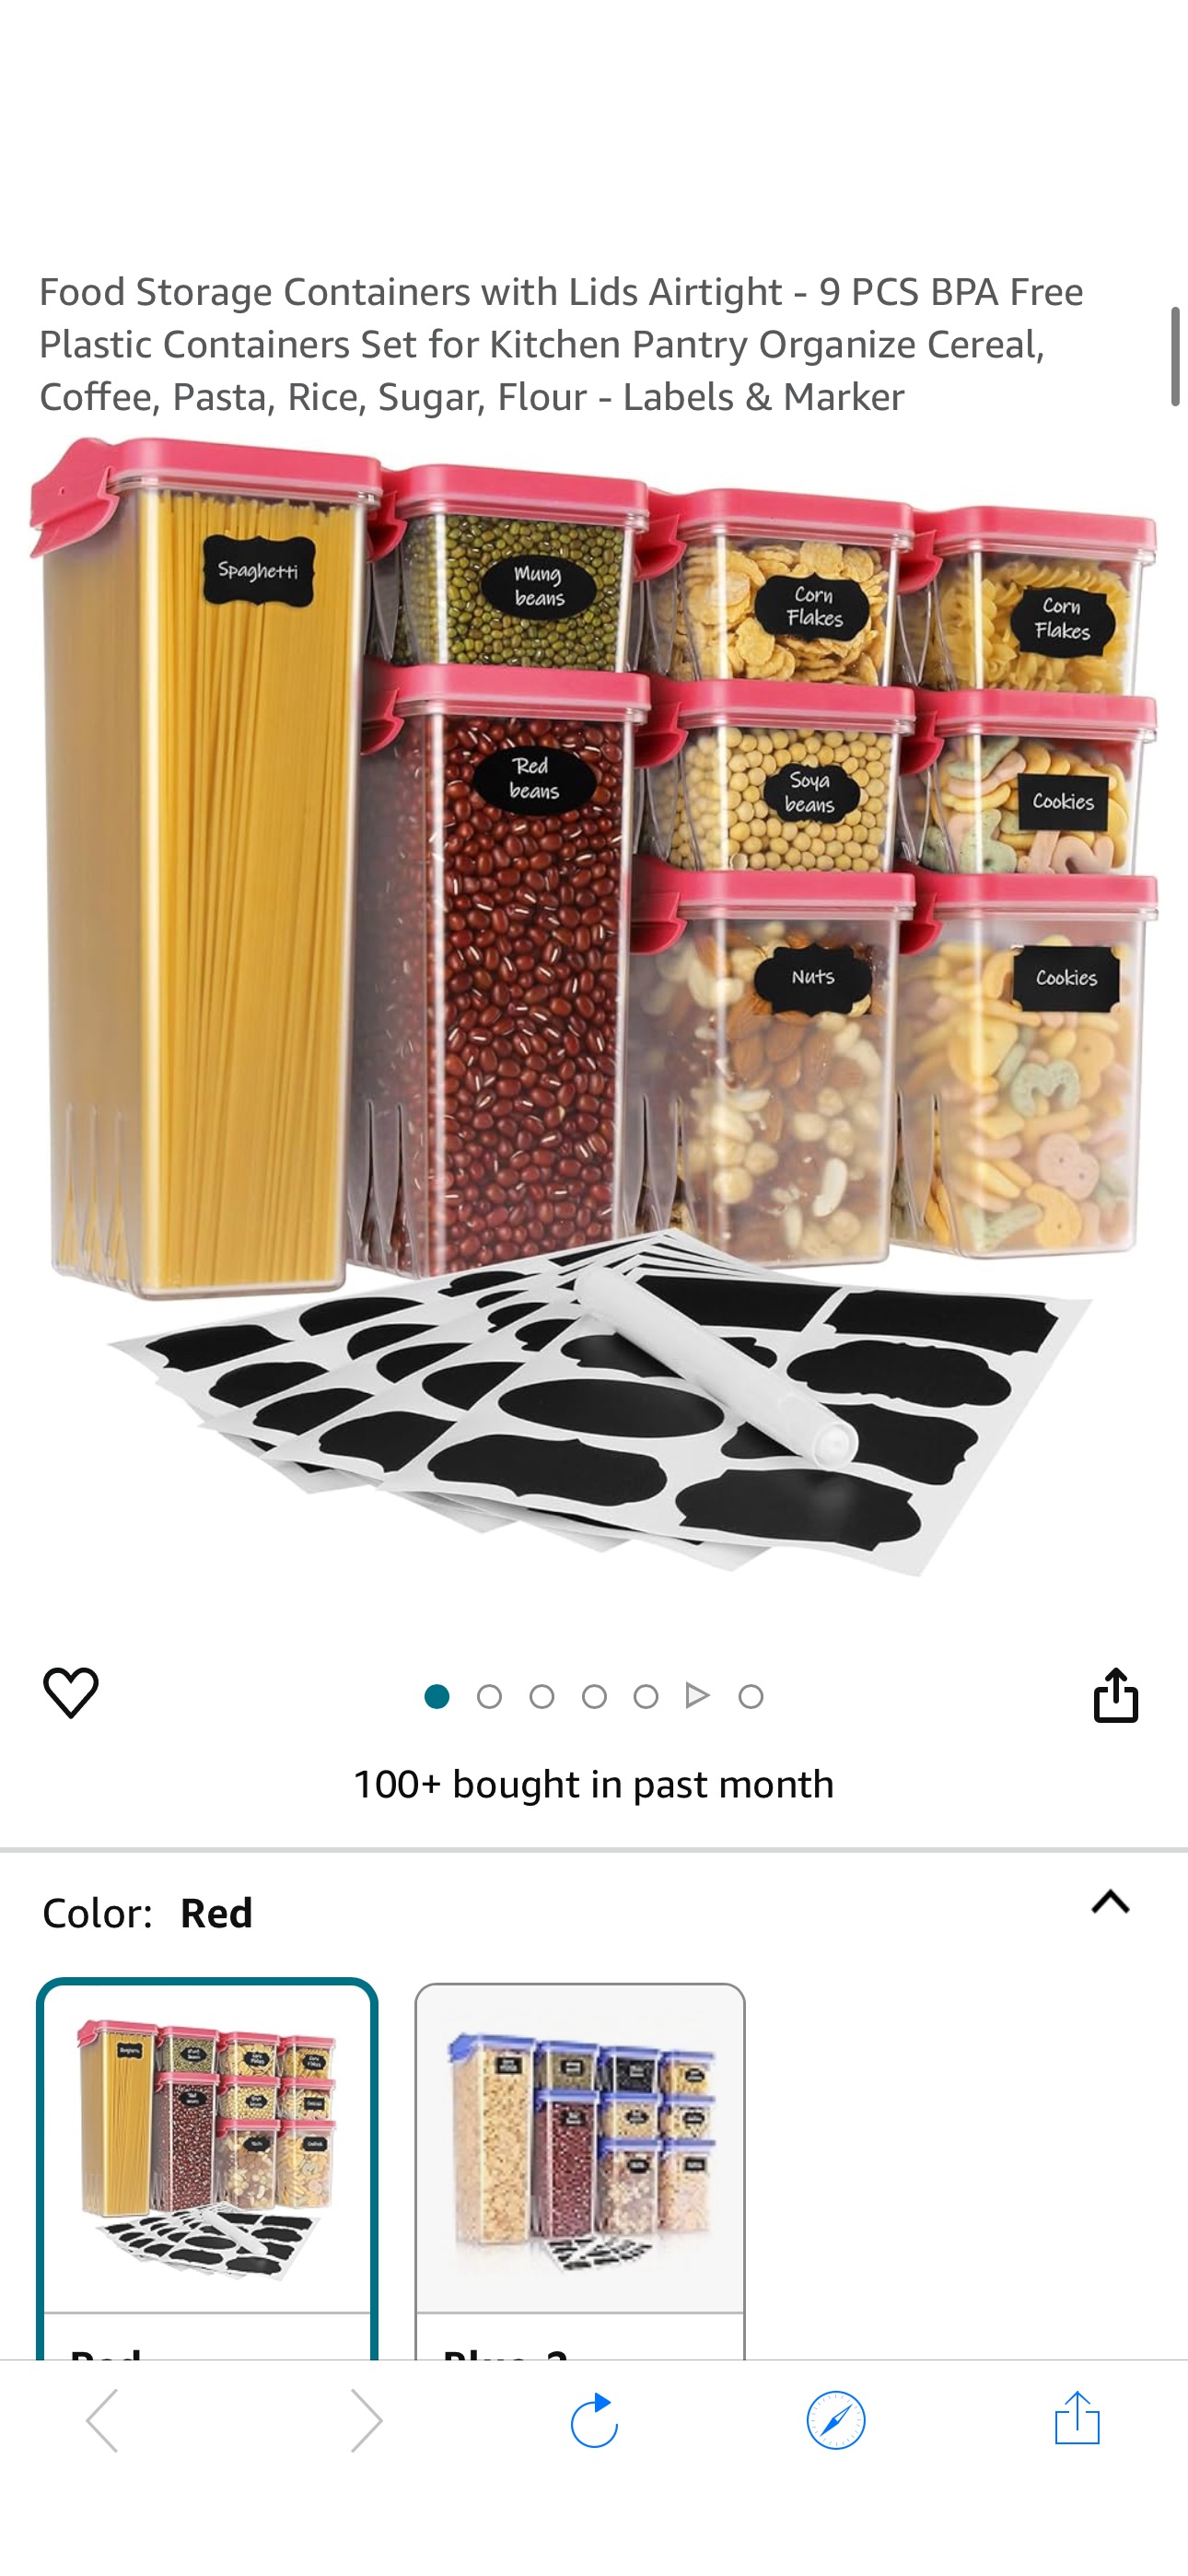 Amazon.com: HOMER Food Storage Containers with Lids Airtight - 9 PCS BPA Free Plastic Containers Set for Kitchen Pantry Organize Cereal, Coffee, Pasta, Rice, Sugar, Flour - Labels & Marker : Home & Ki